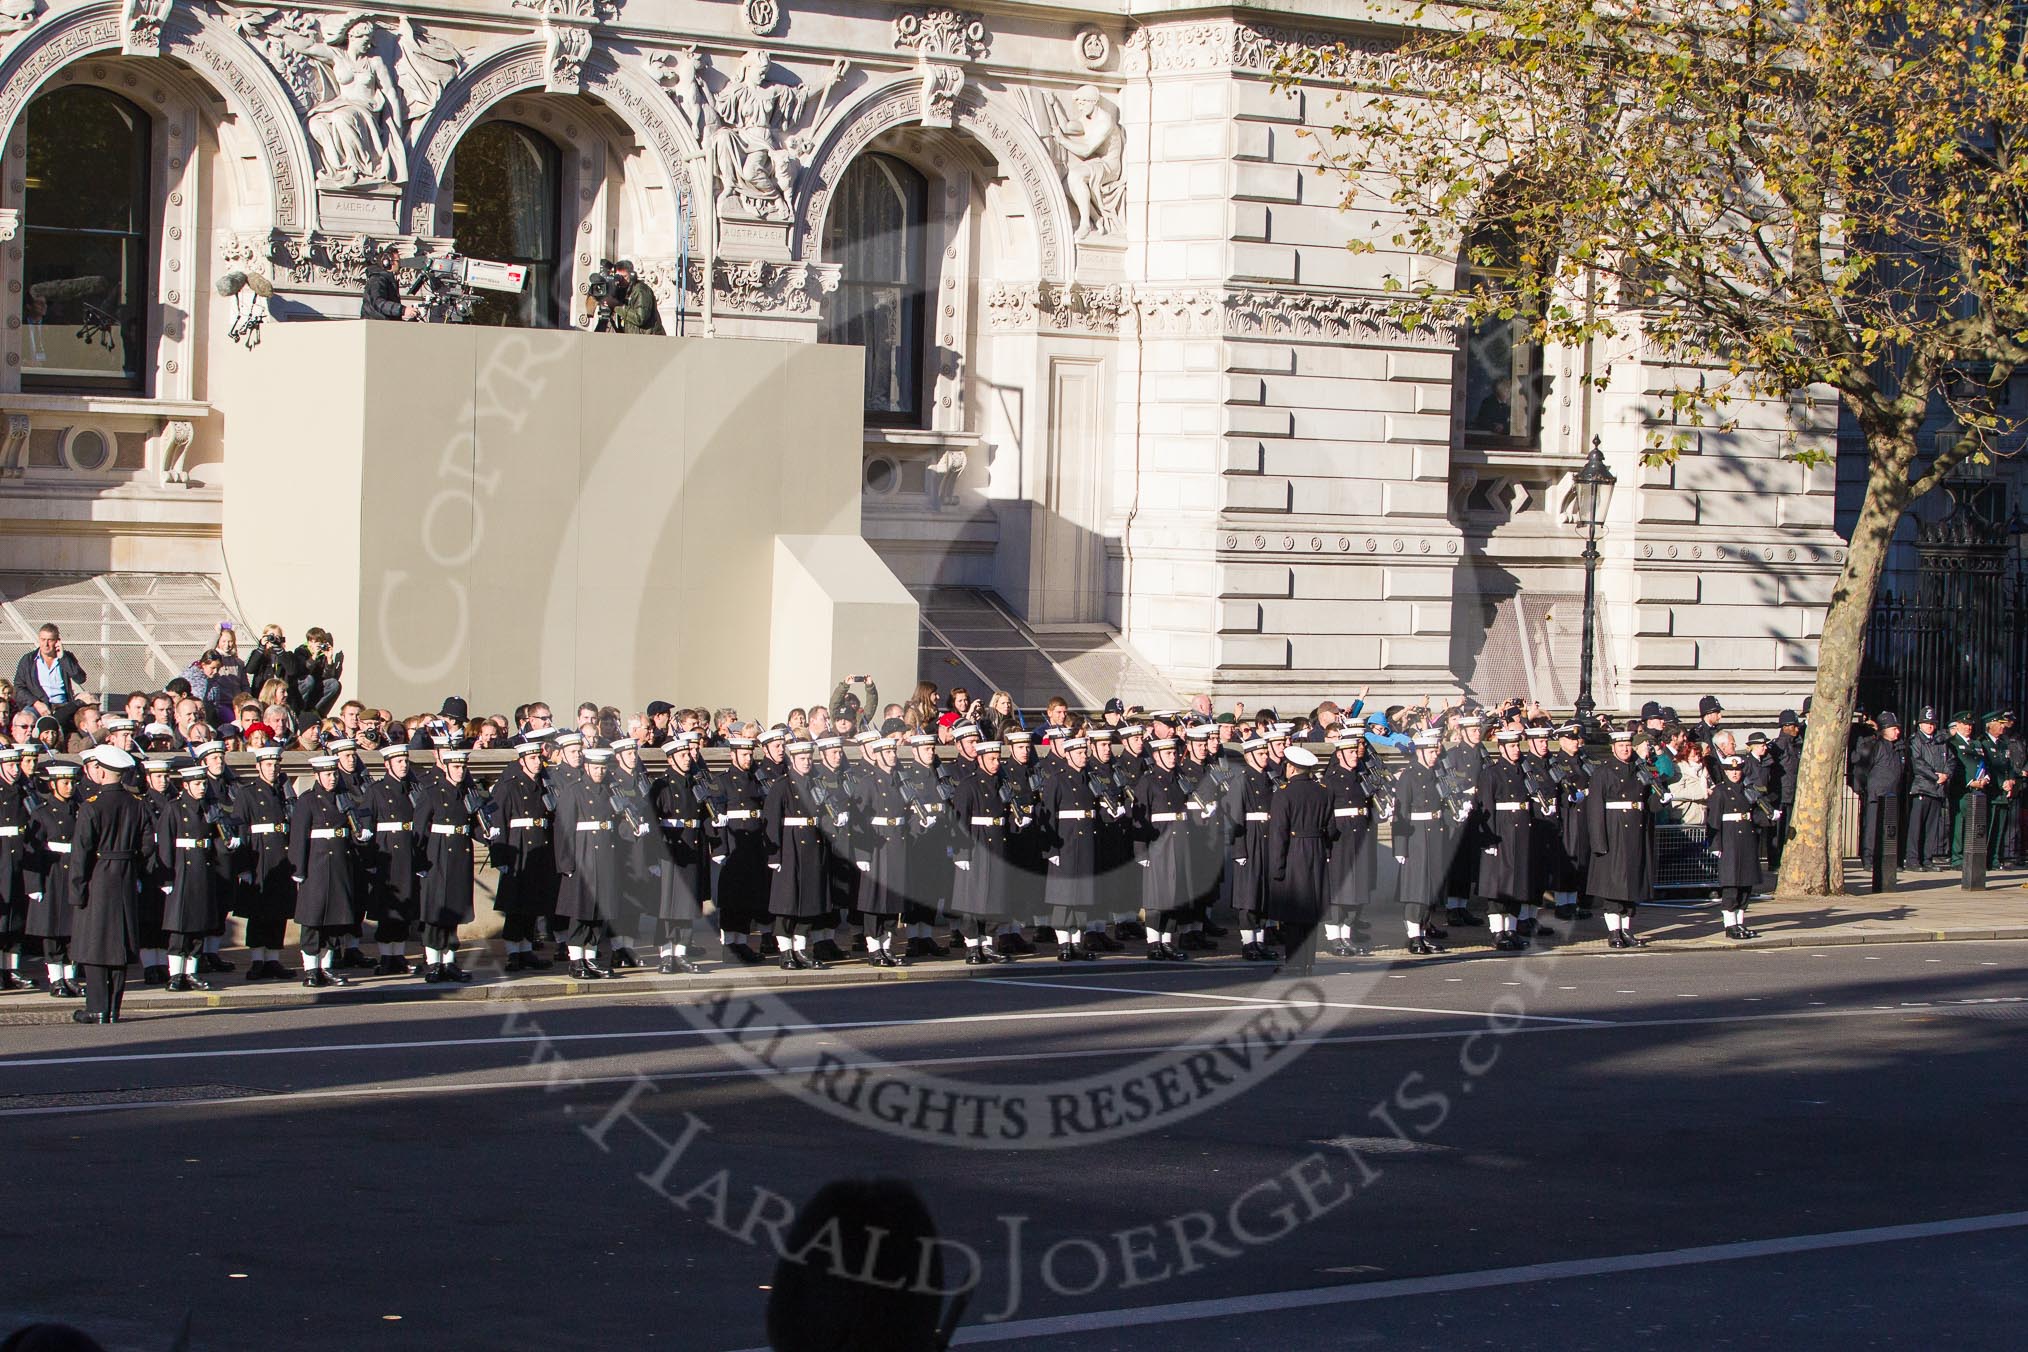 The Royal Navy detachment in position on the northern side of Whitehall, between the Cenotaph and Downing Street.